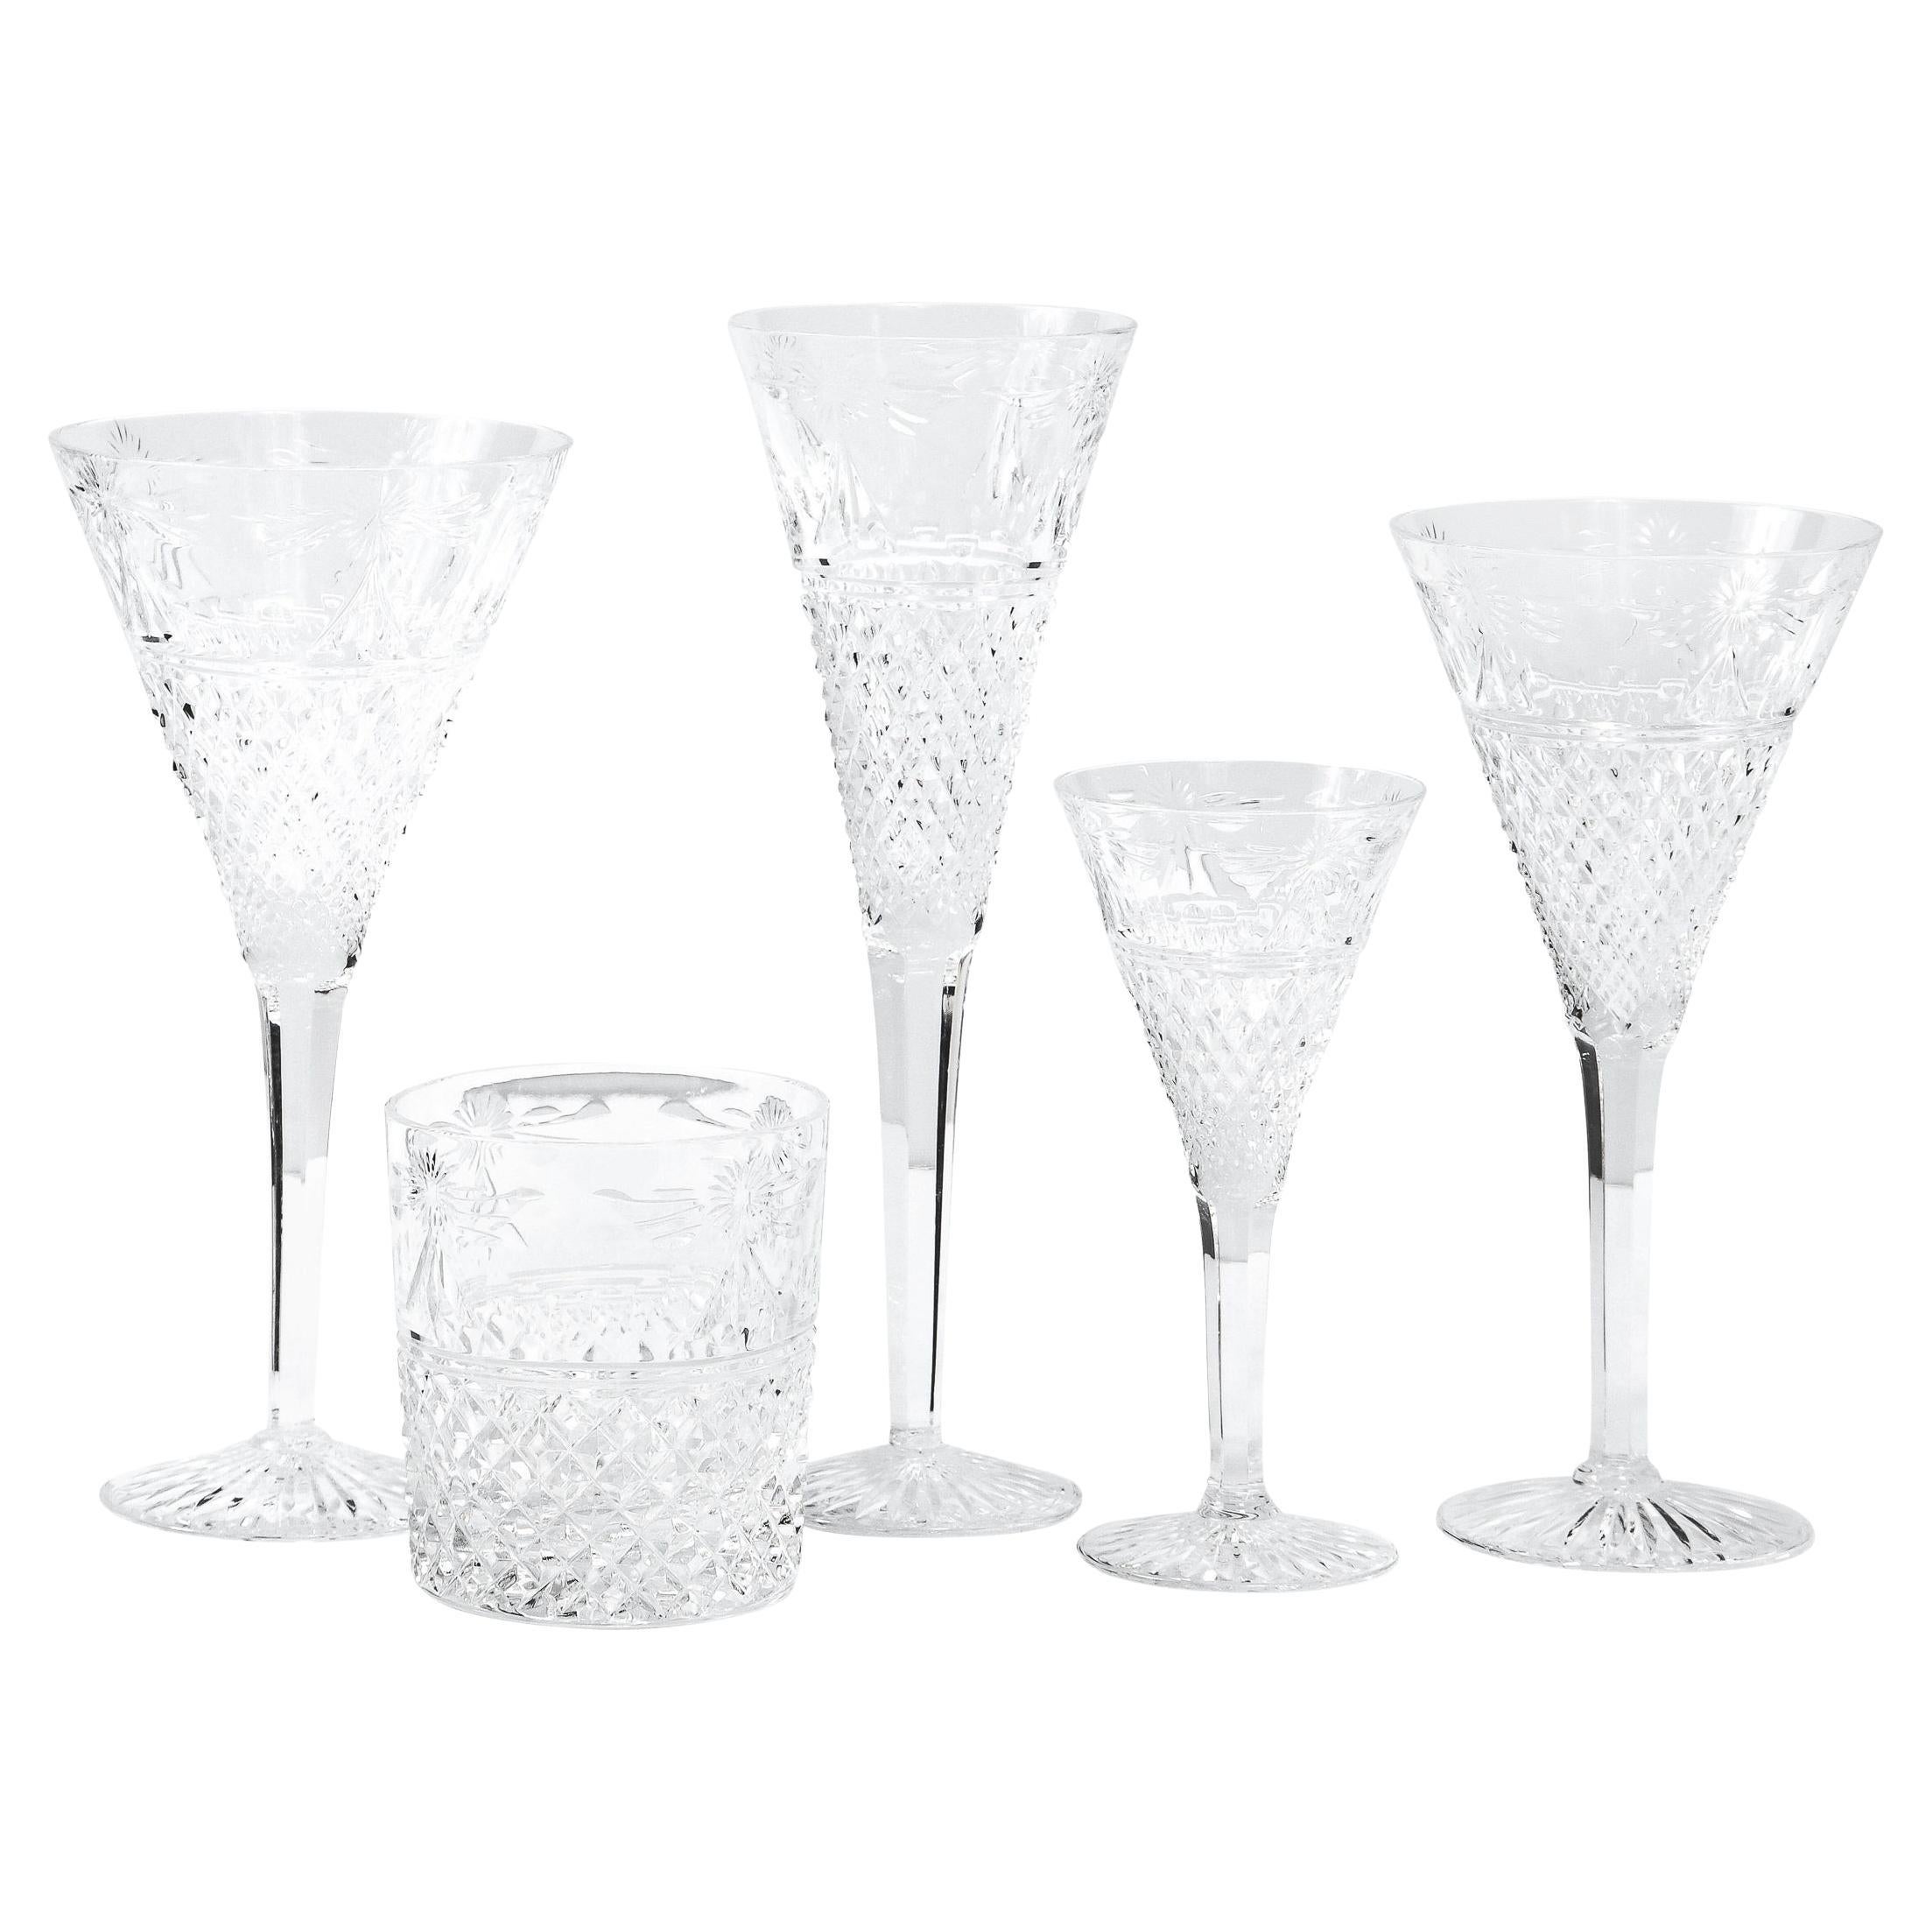 Set of 60 Modernist Etched Crystal Glasses by Stuart with Neoclassical Detailing For Sale